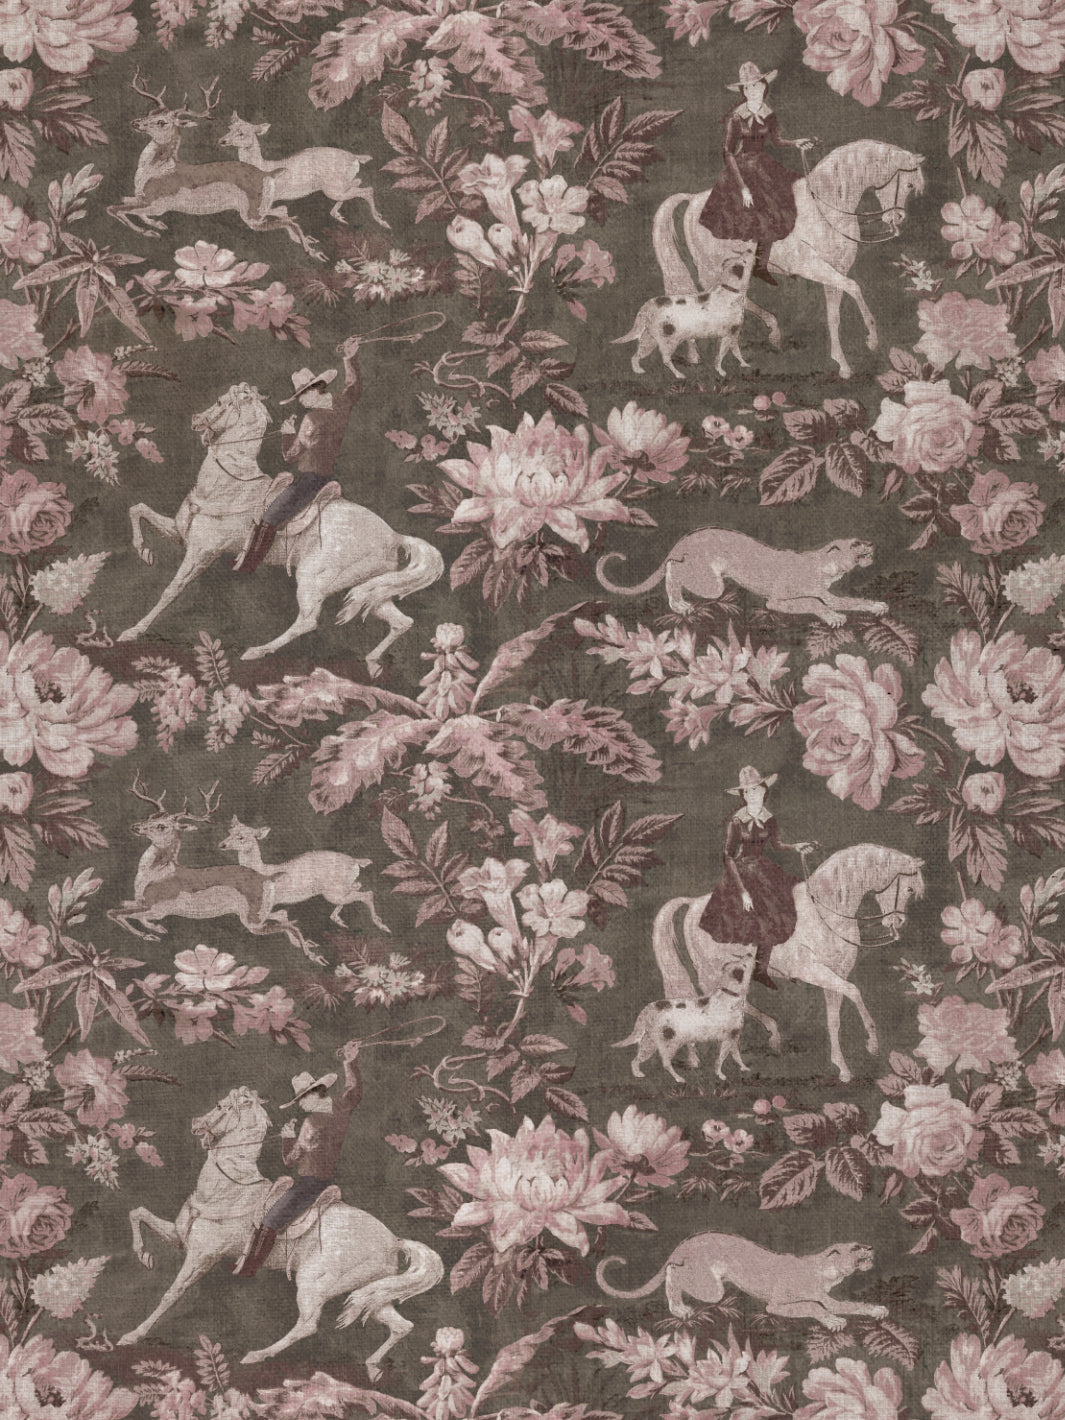 'Cowboy Toile' Linen Fabric by Nathan Turner - Pink Brown